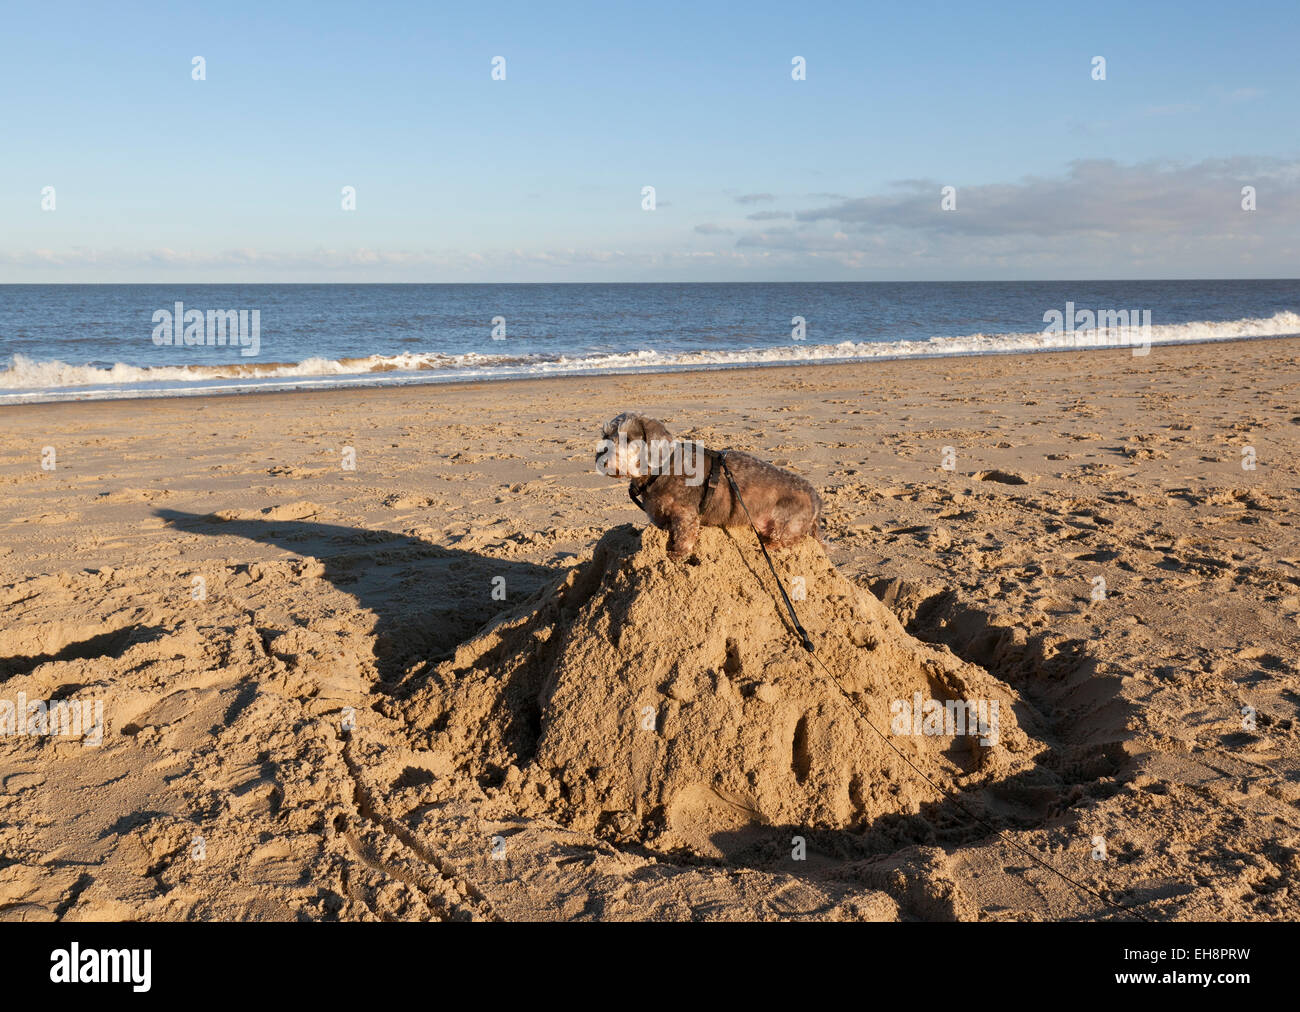 A Miniature Wire Haired Dachshund dog sitting on top of a sandcastle on a beach Stock Photo